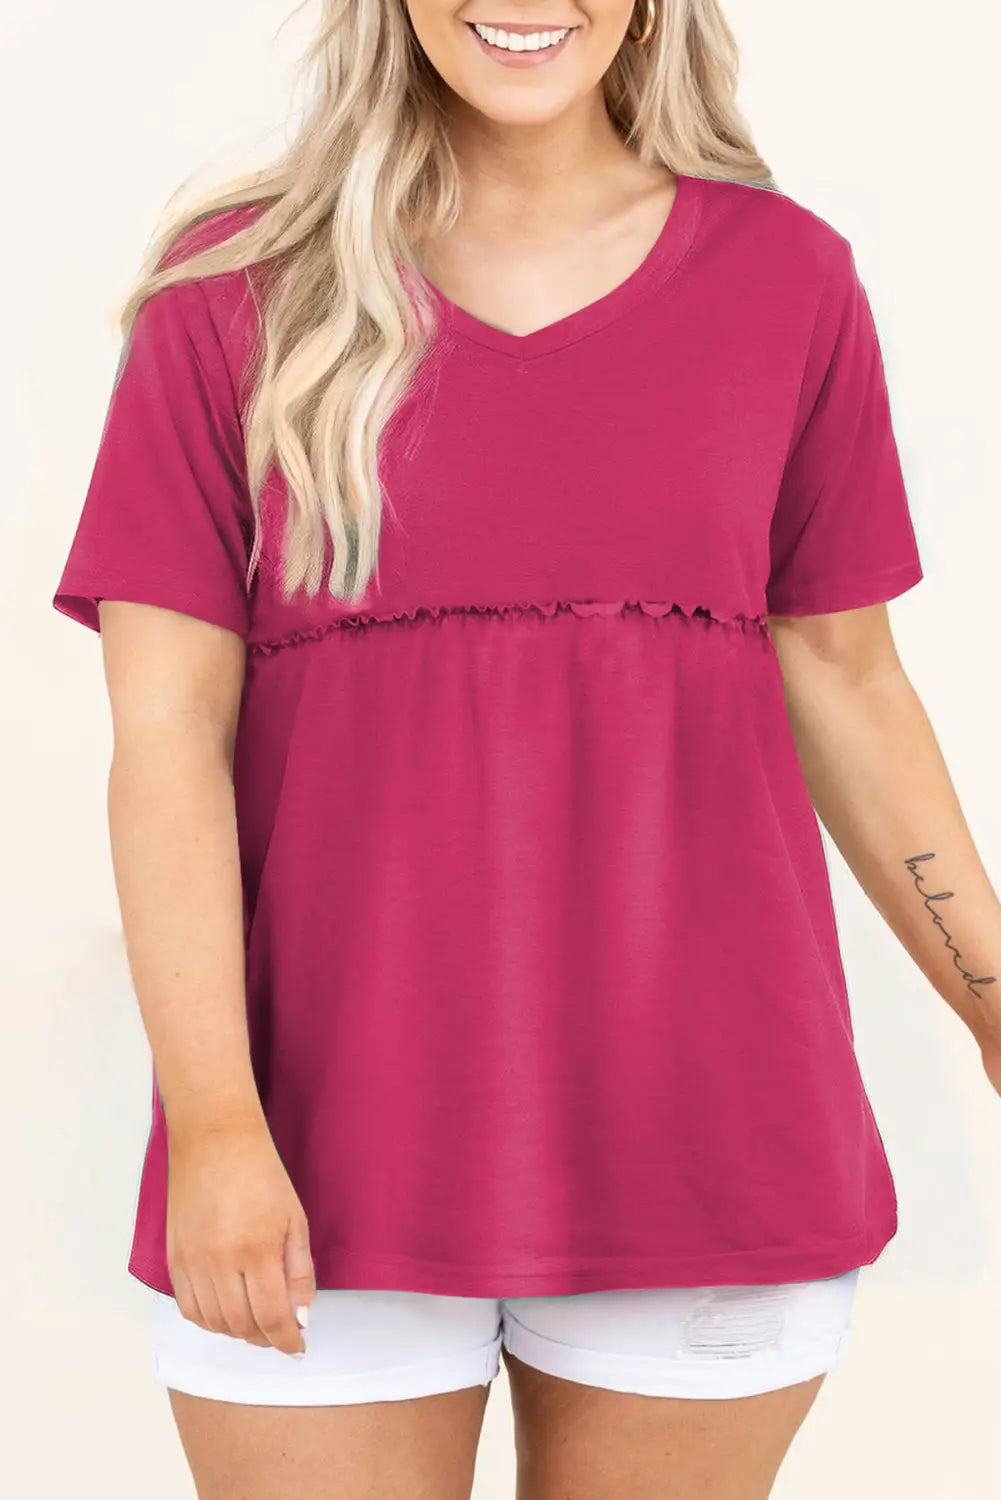 Rose red solid short sleeve flowy plus size top - 1x / 65% polyester + 30% viscose + 5% elastane